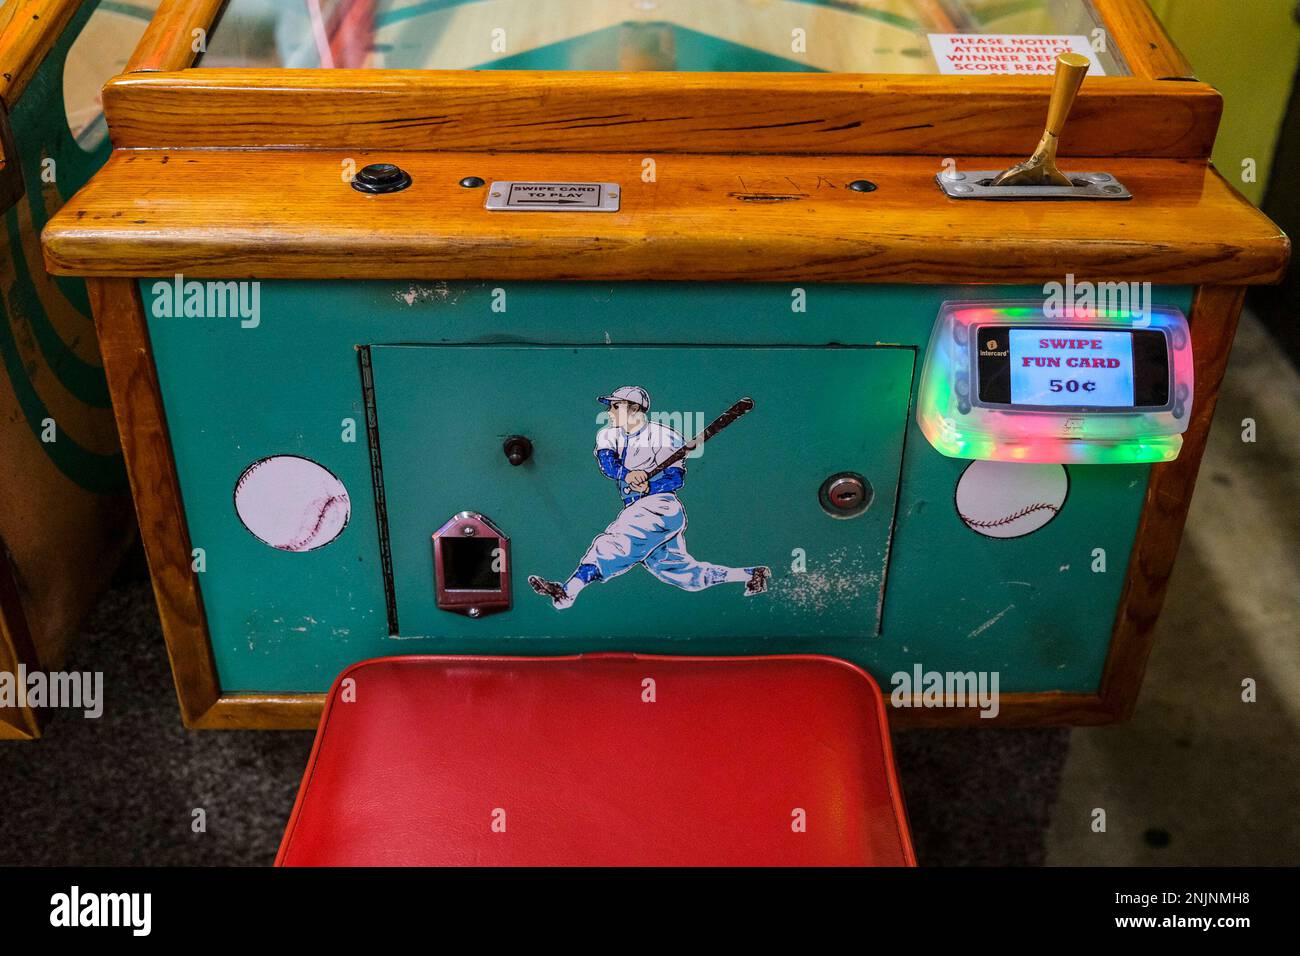 The 38 1957 Williams Deluxe Baseball arcade game is shown at Fun Plaza on July 11, 2022 in Myrtle Beach, S.C